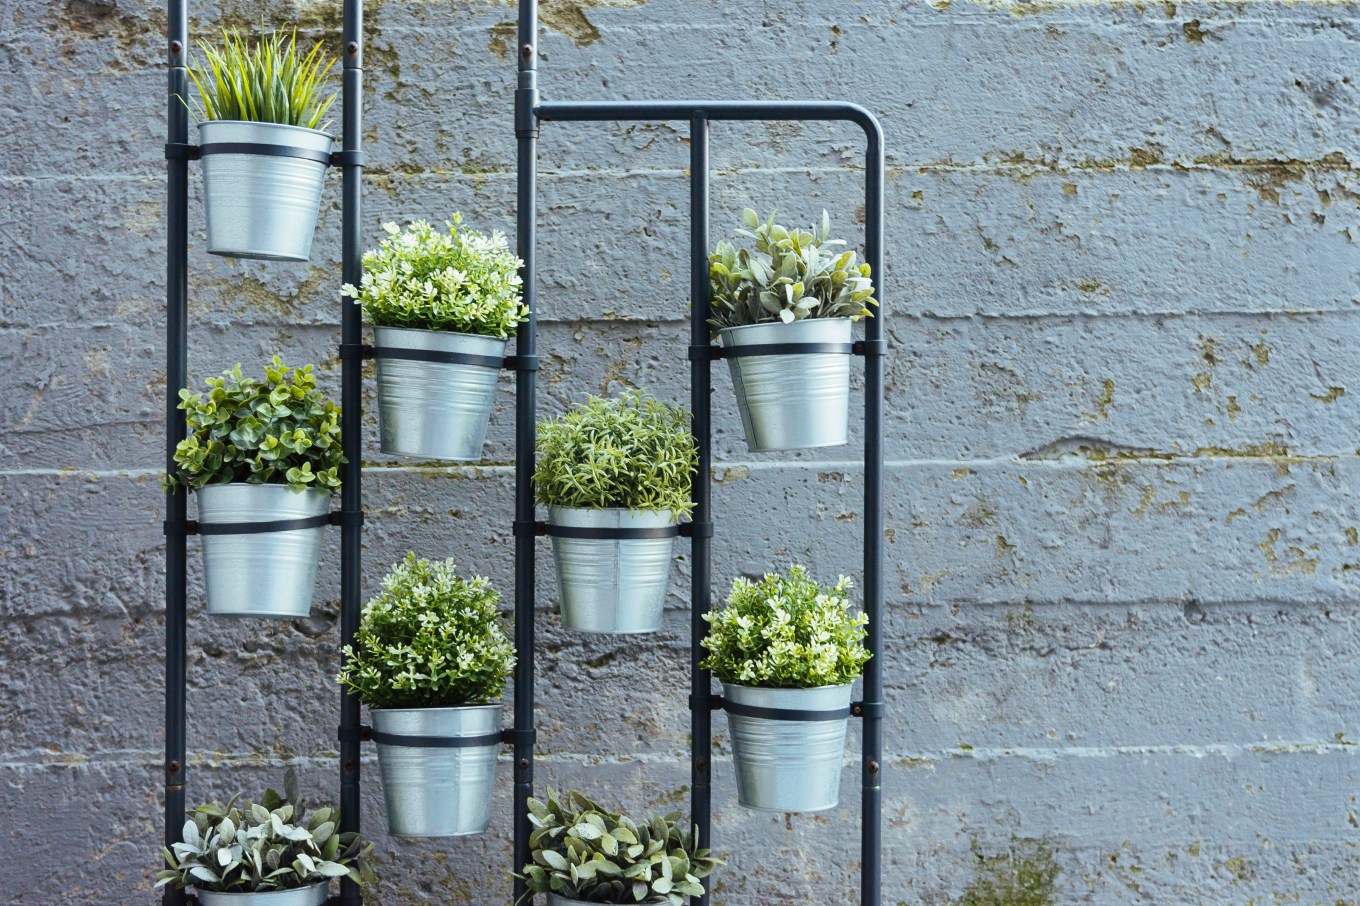 Herb wall featuring aluminium pots, hanging on black frame against a gray brick wall.